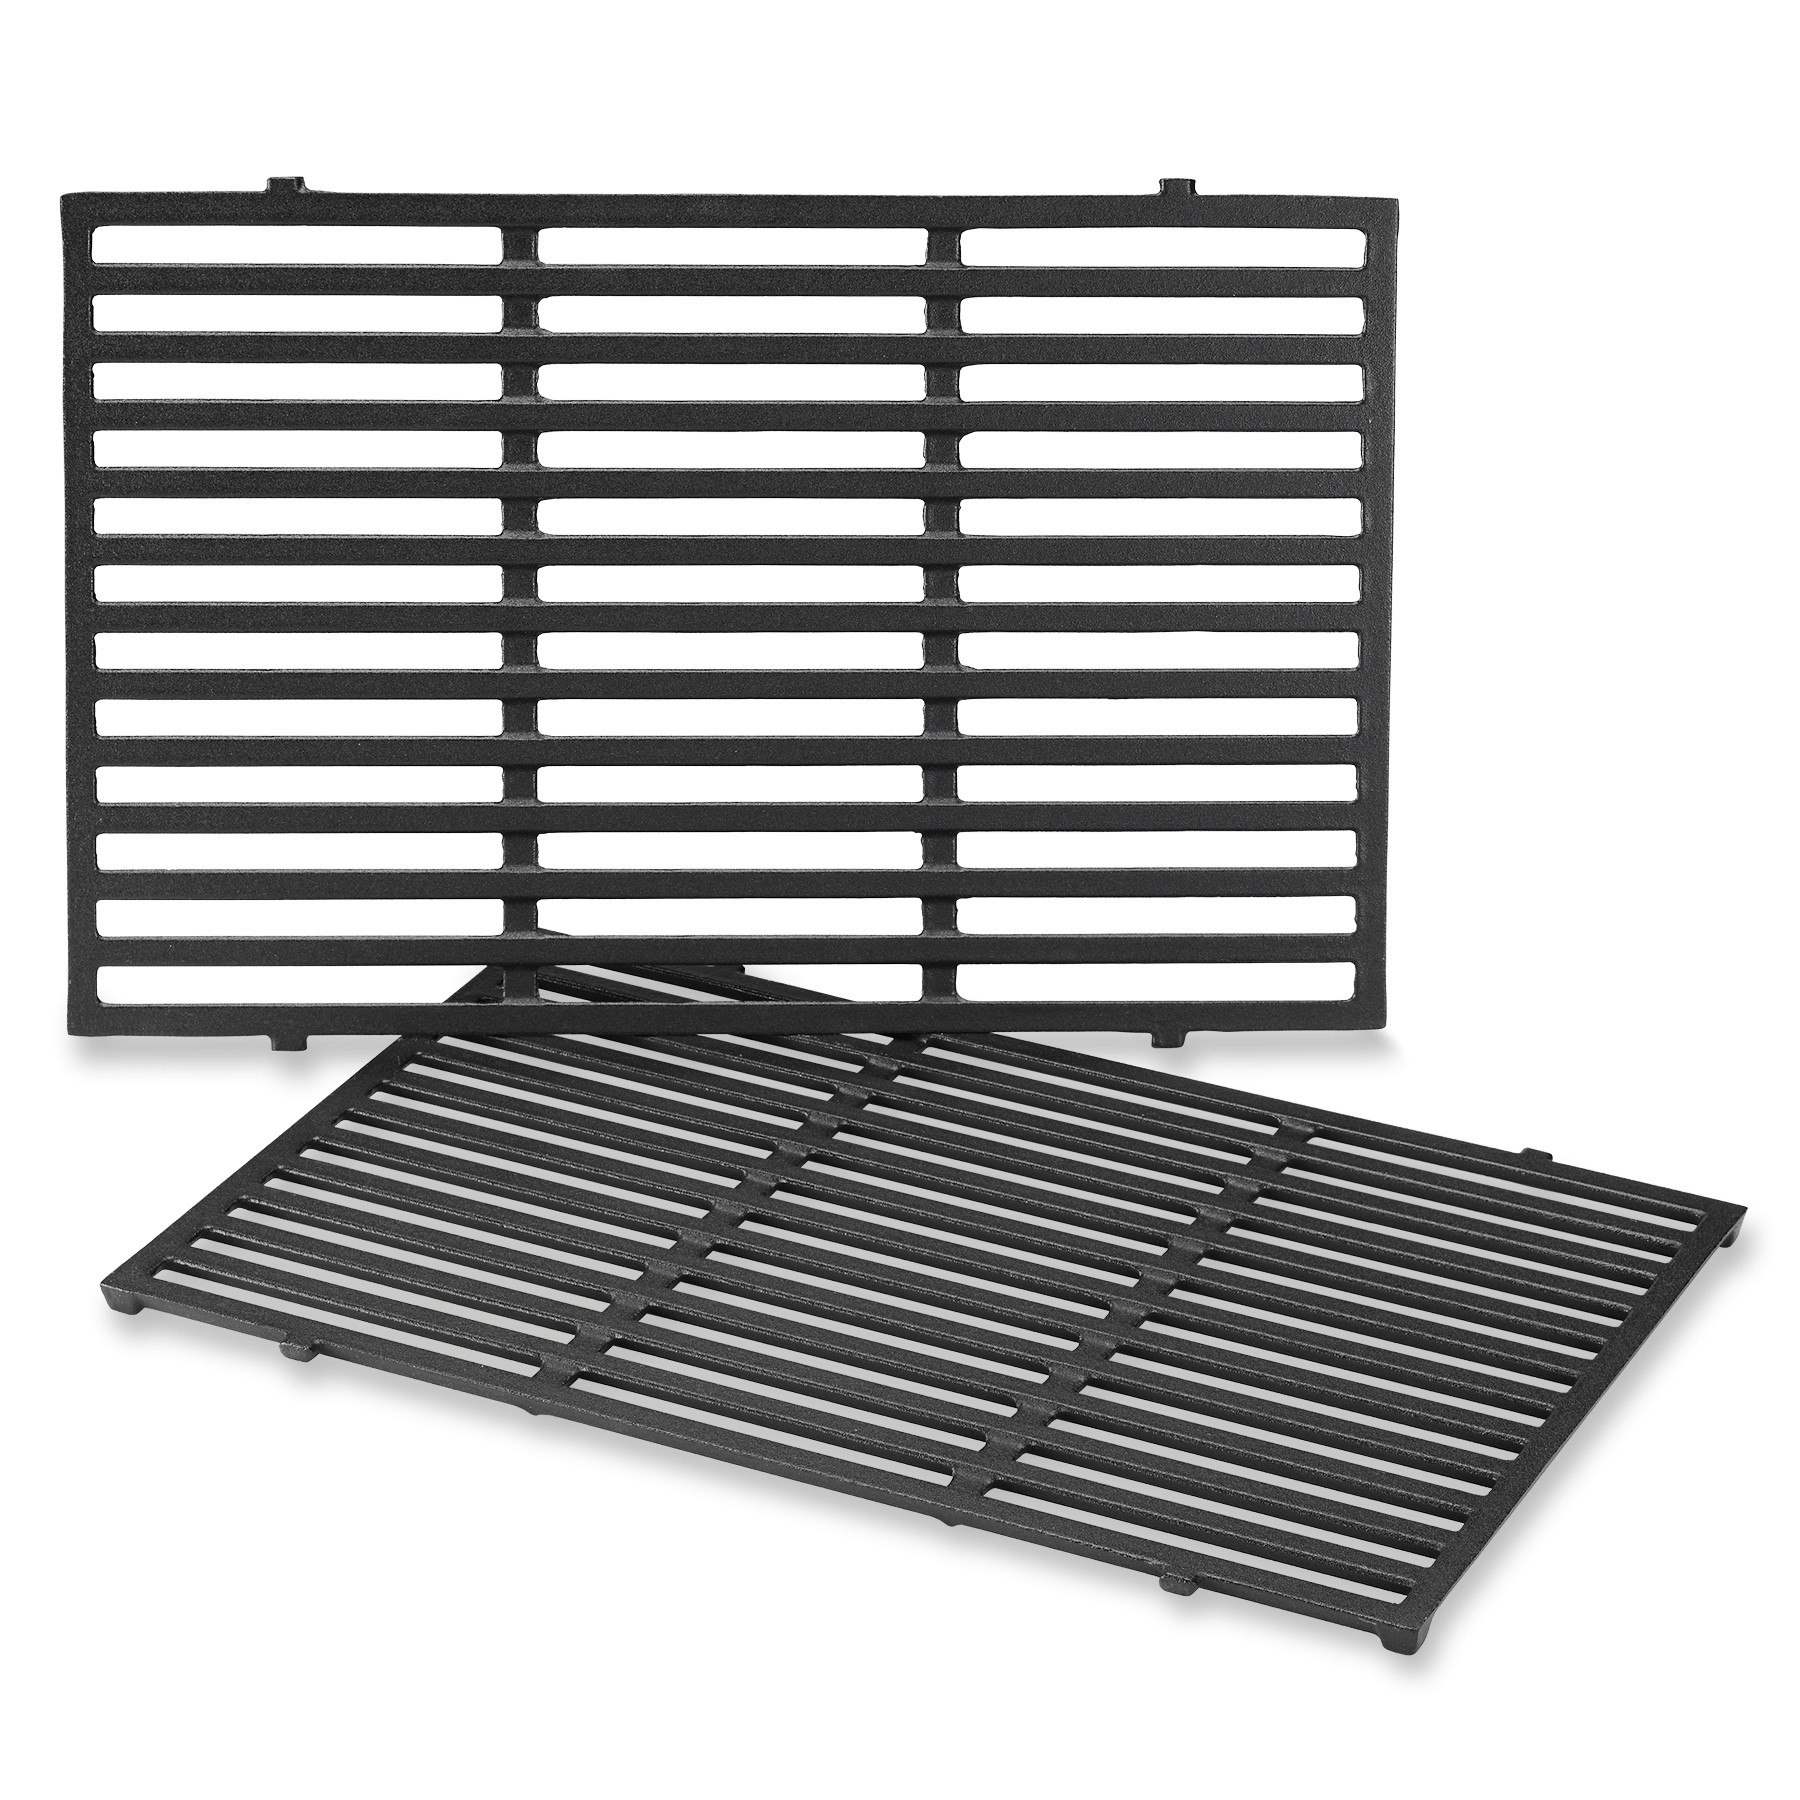 330 Cooking Grid Grates Replacement Part for Weber 7528 GASPRO 7524 19.5 Cast Iron Grill Grates for Weber Genesis 300 Series Genesis E/S-310 320 2-Pack 